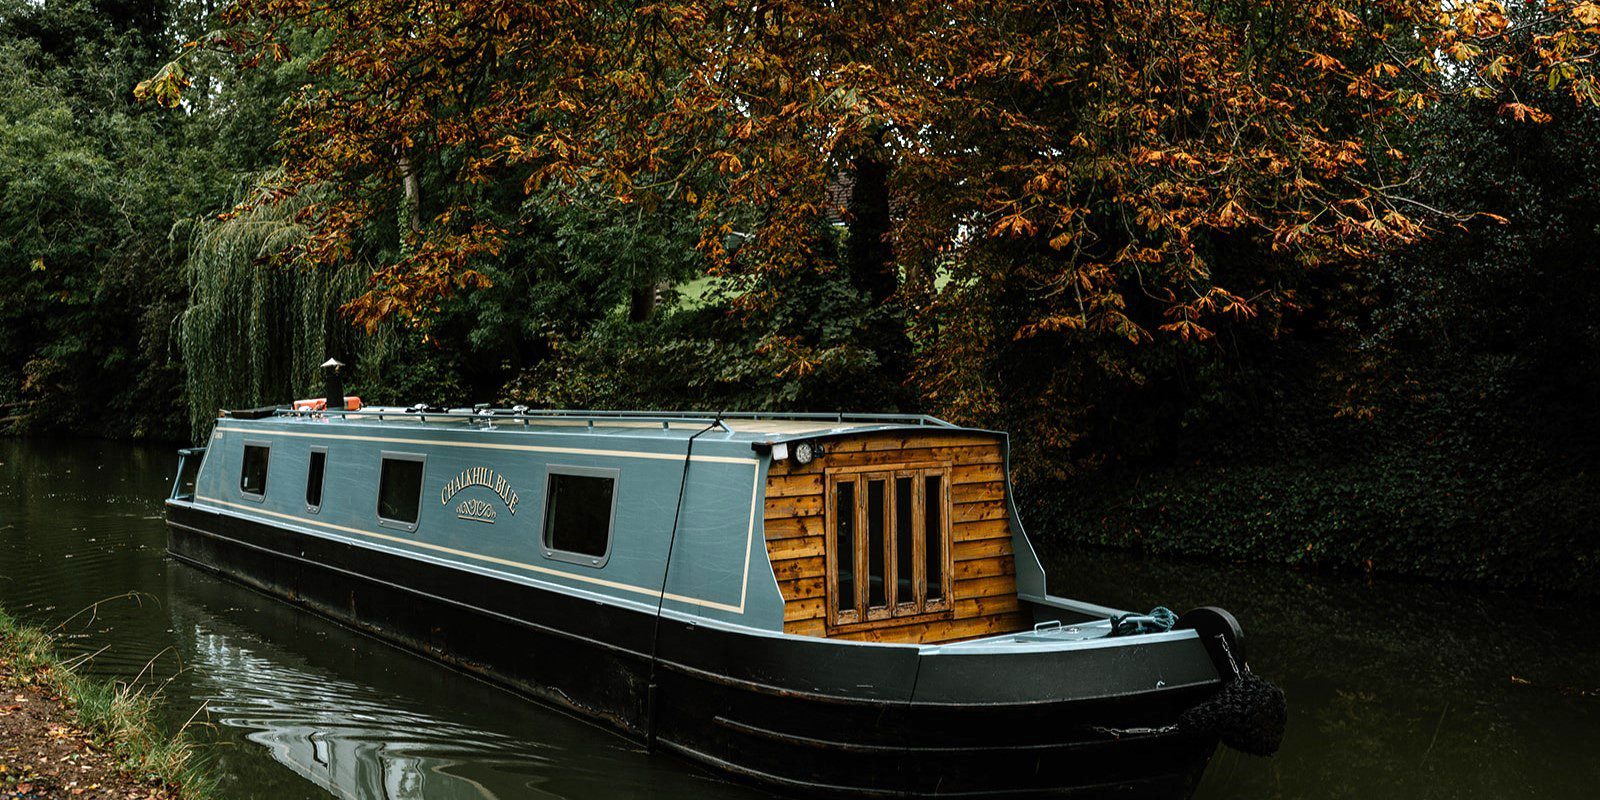 Autumn and winter on a canal boat 1